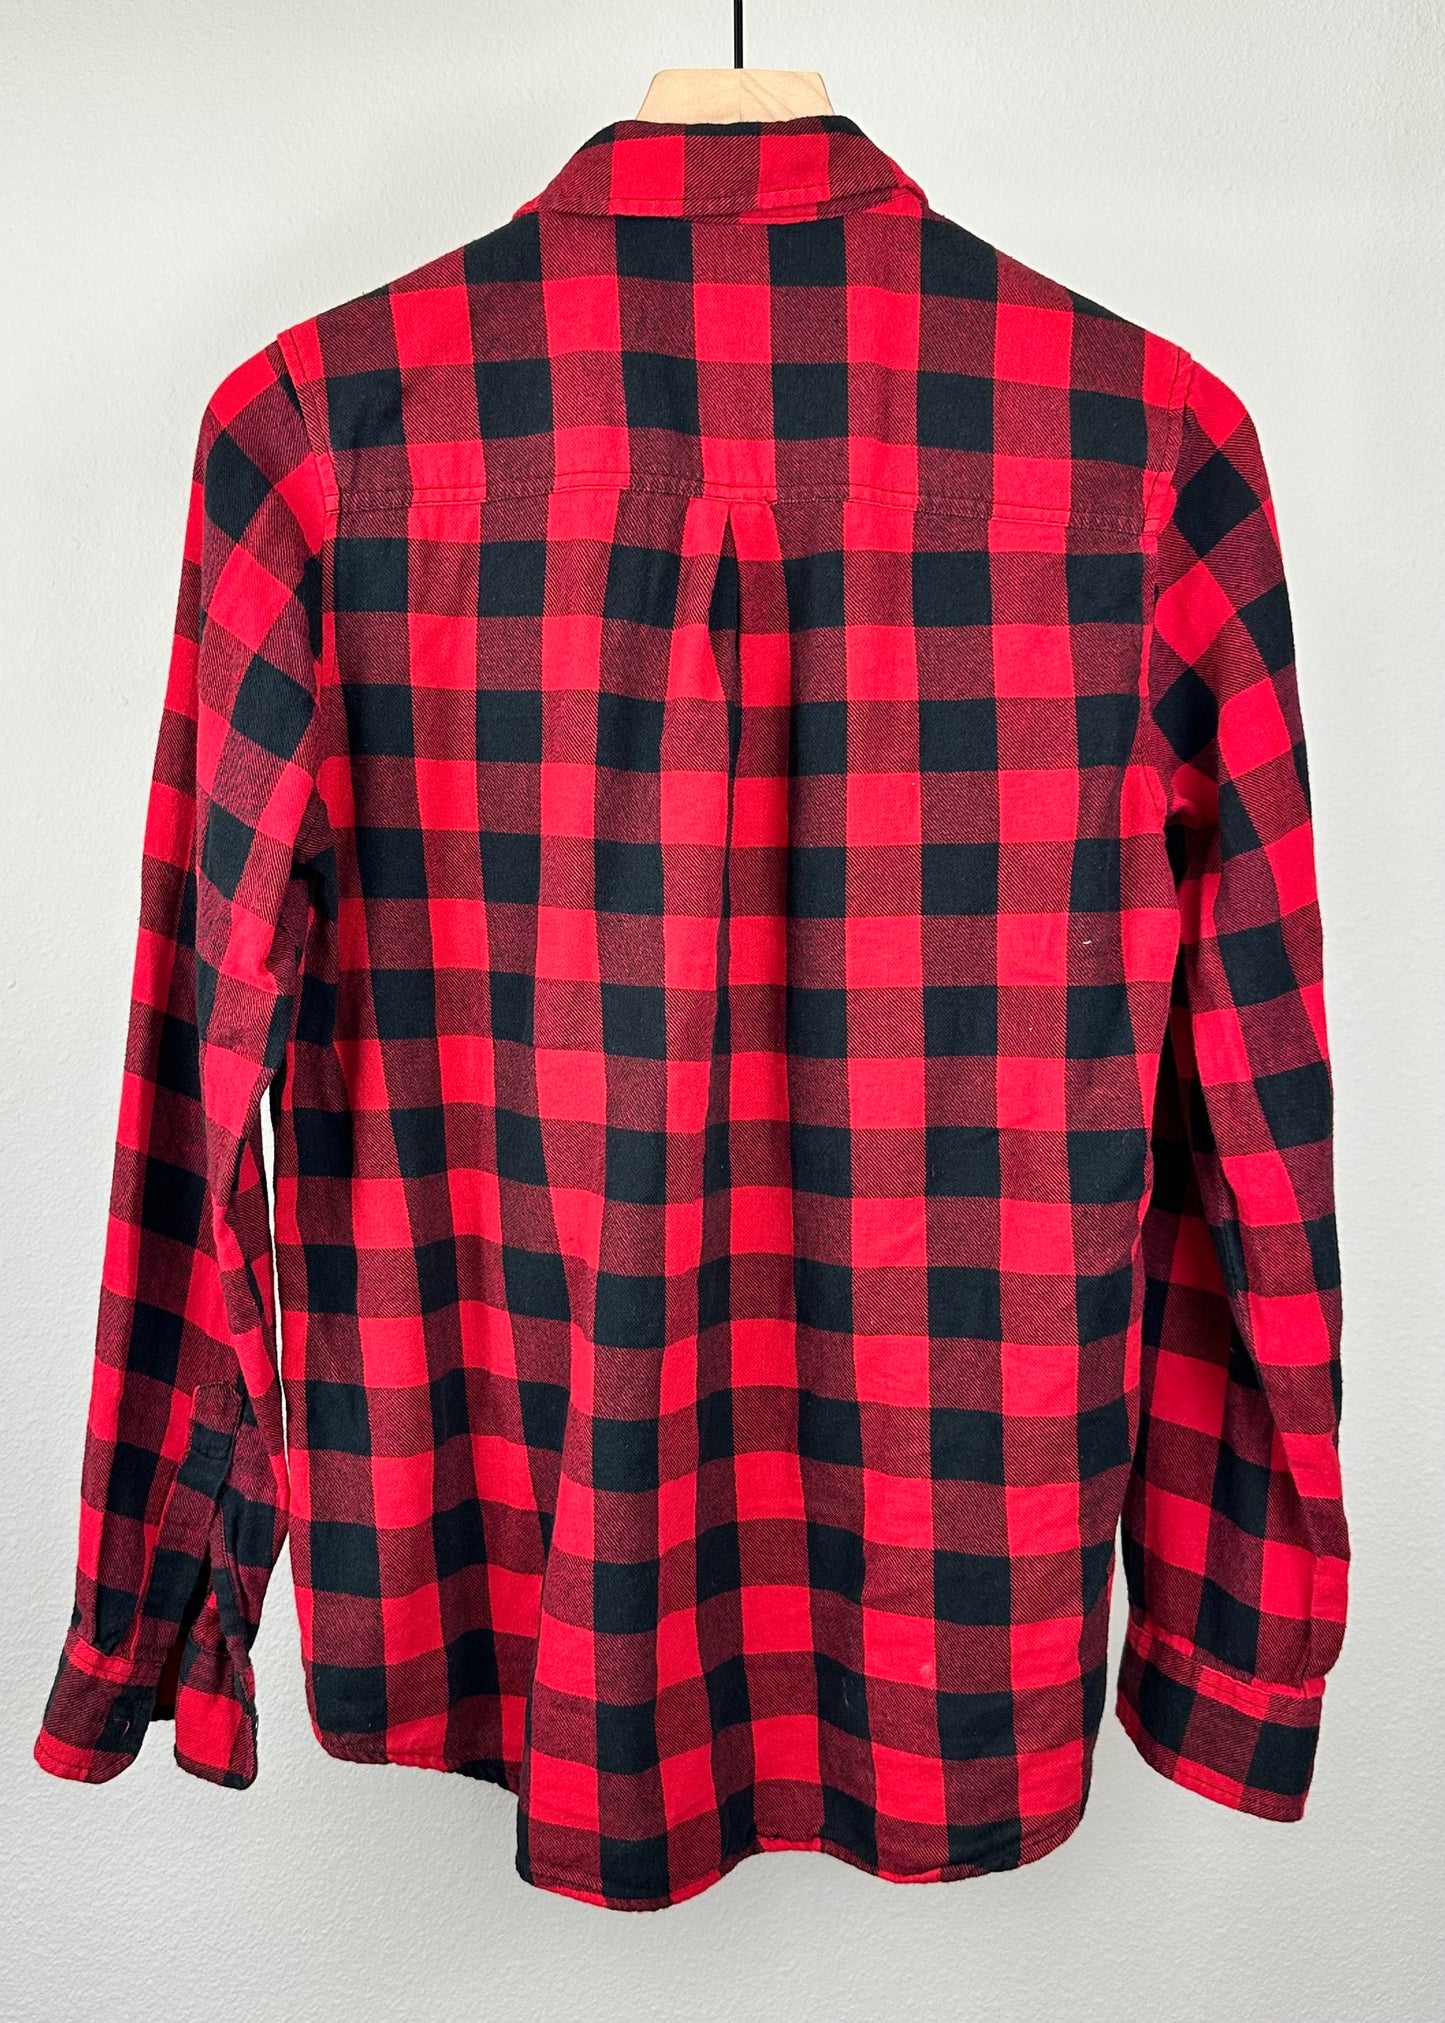 Black and Red Plaid Button Up by Forever 21